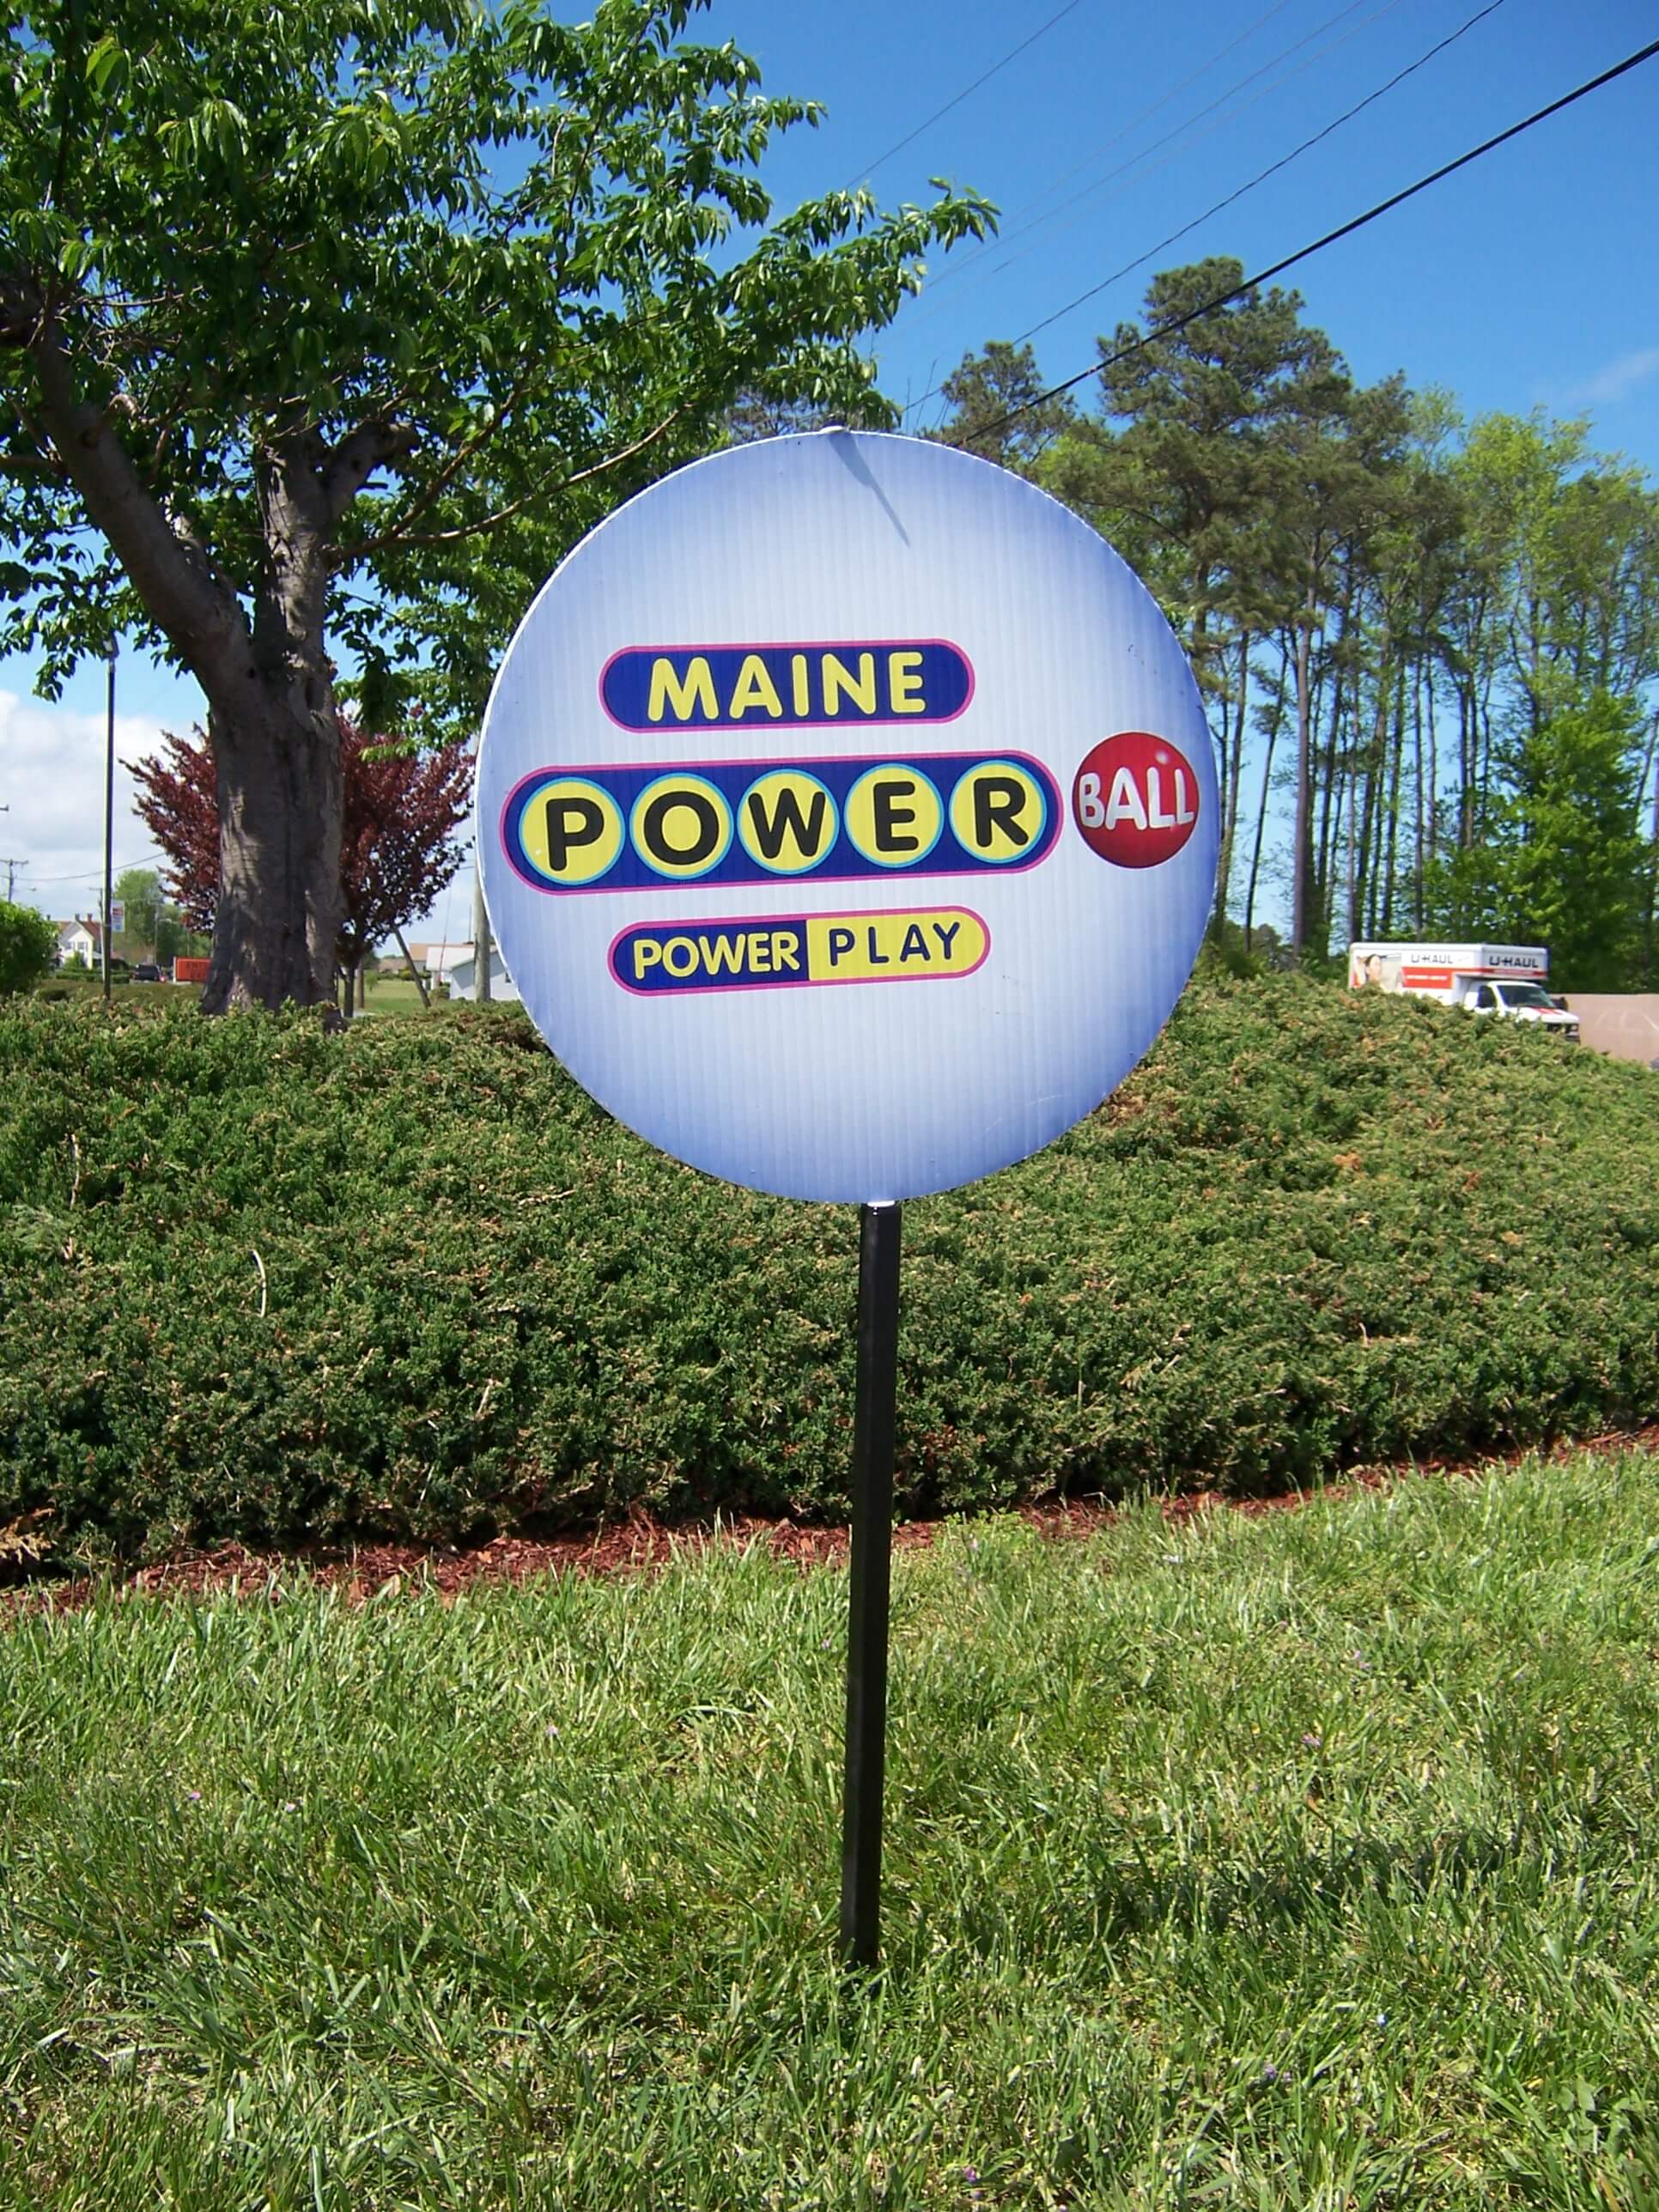 A lawn display using sign board as exterior merchandising